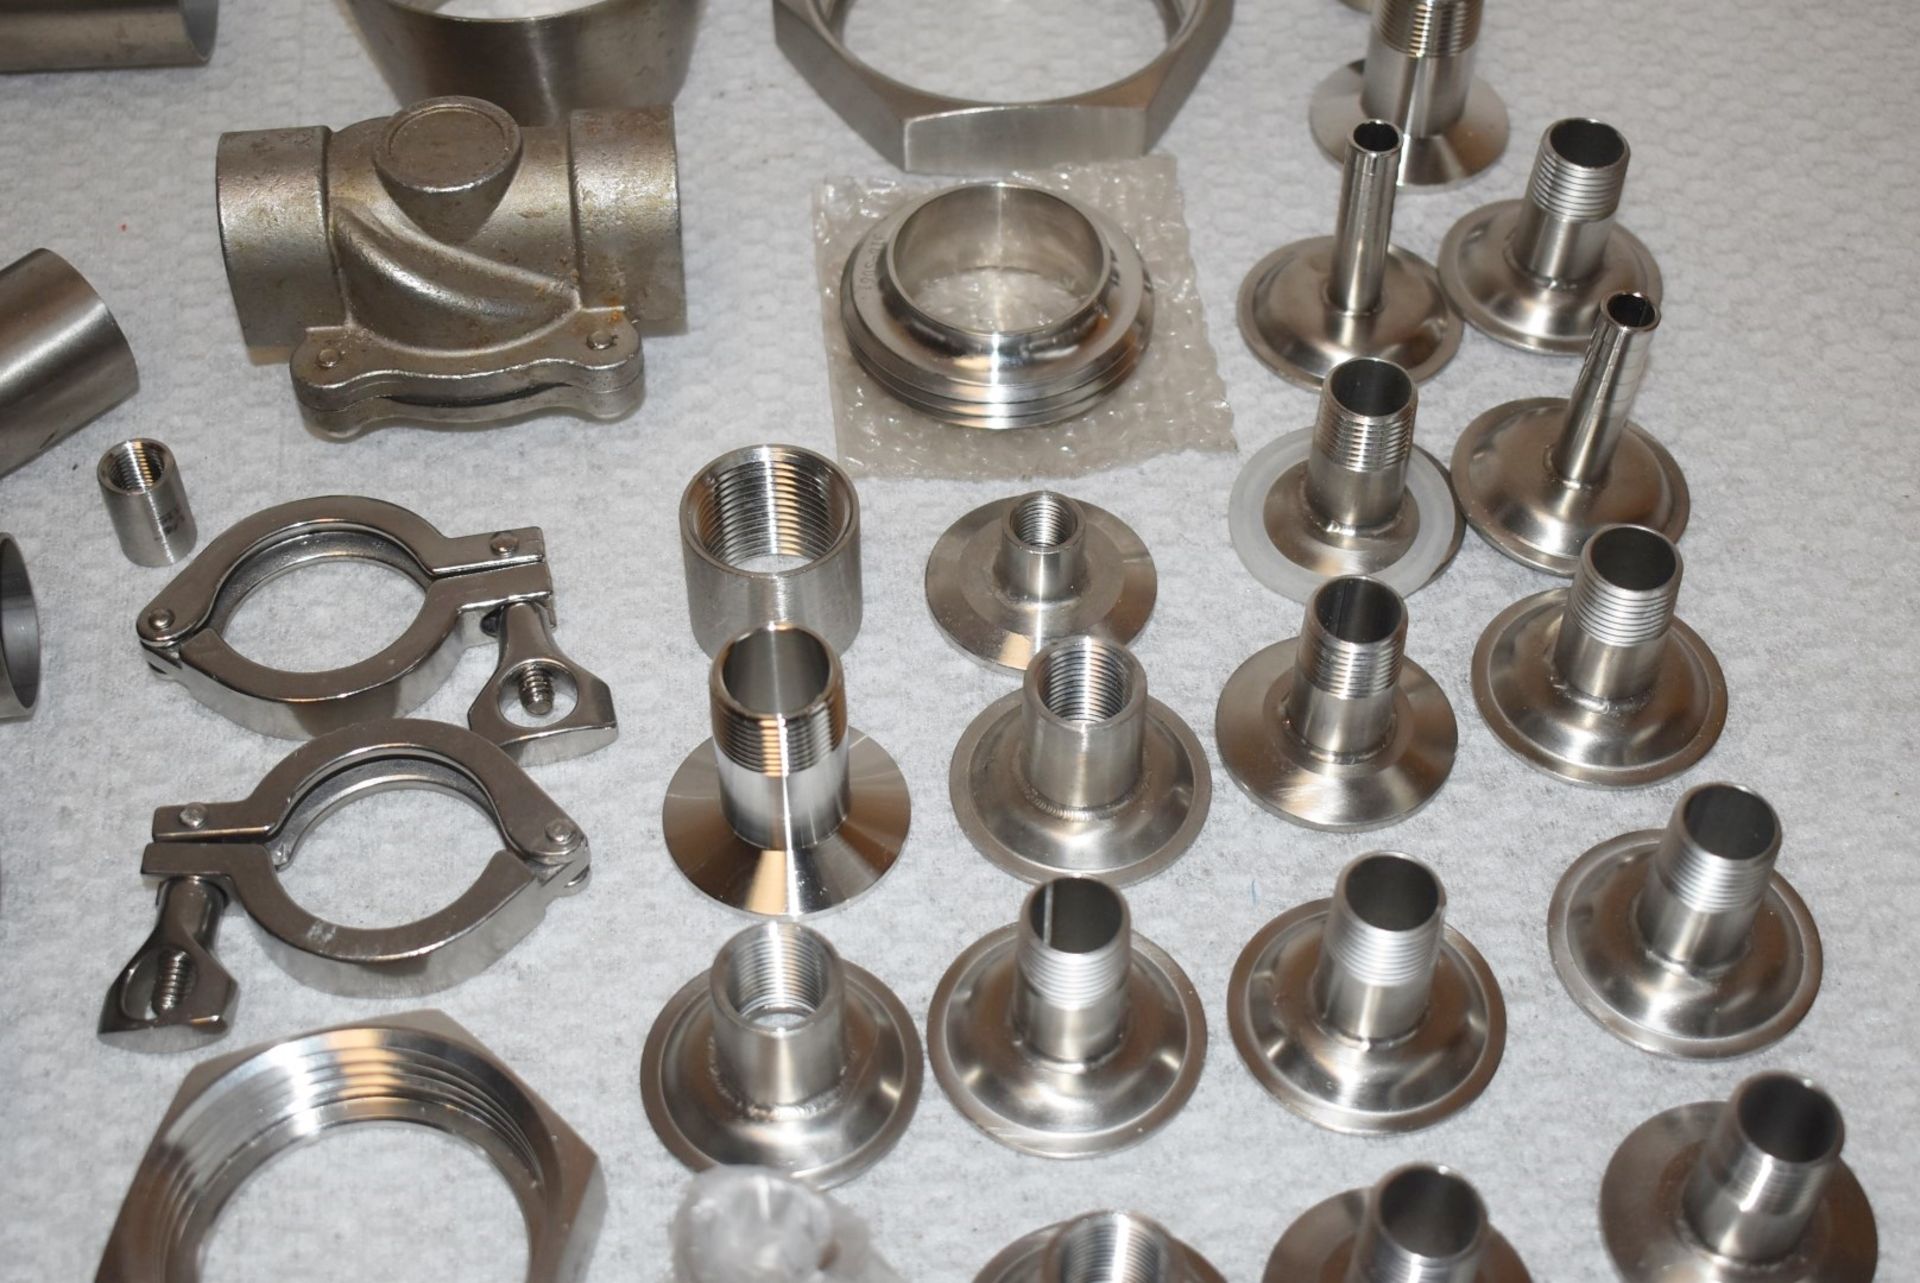 Assorted Job Lot of Stainless Steel Fittings For Brewery Equipment - Includes Approx 37 Pieces - - Image 7 of 8